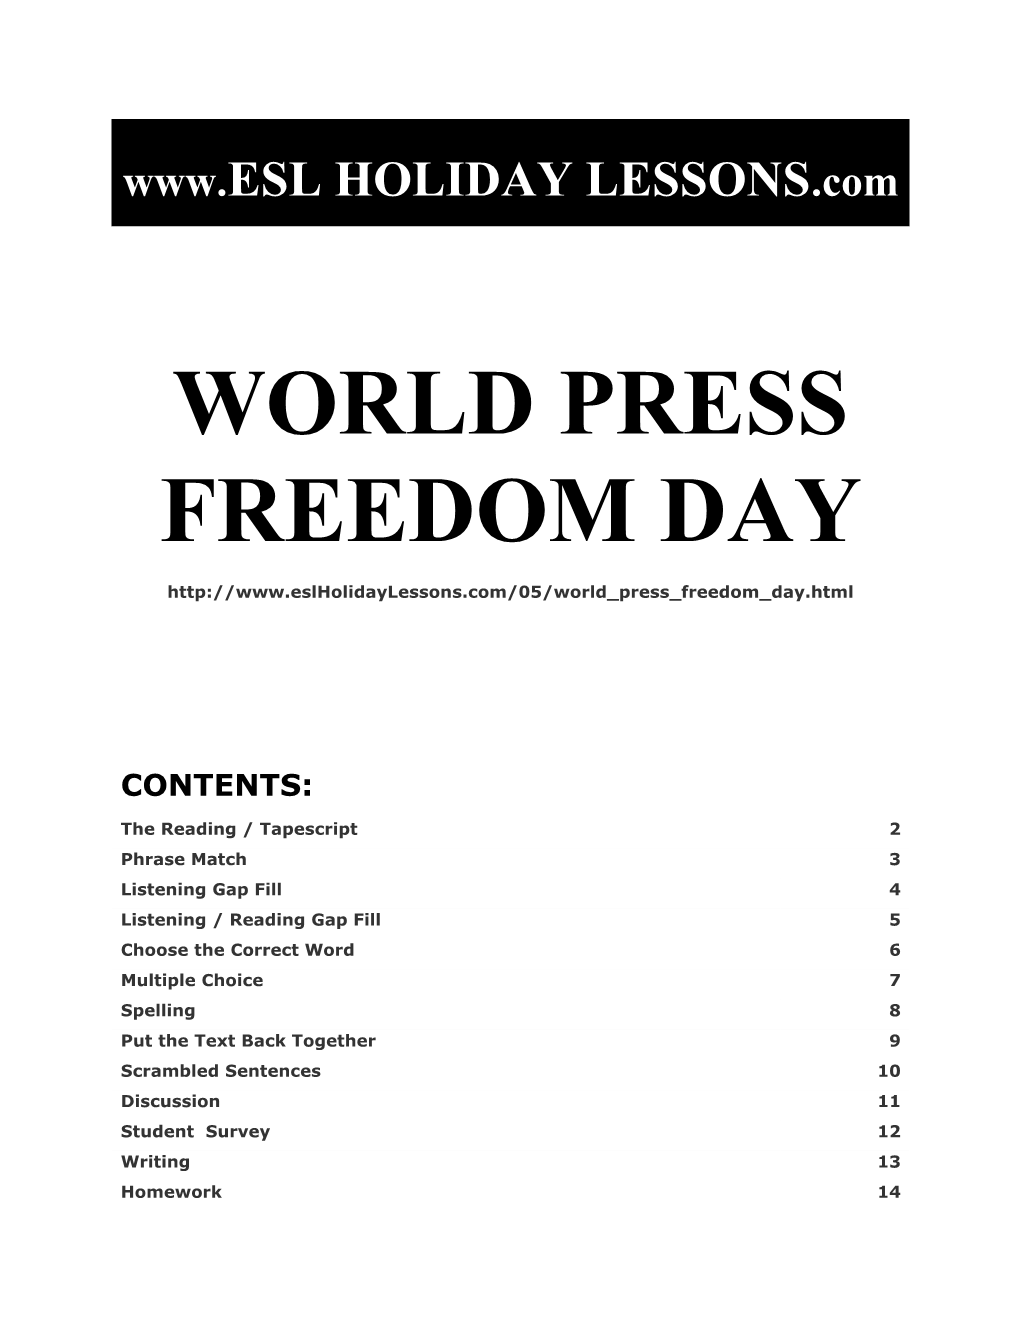 Holiday Lessons - World Press Freedom Day